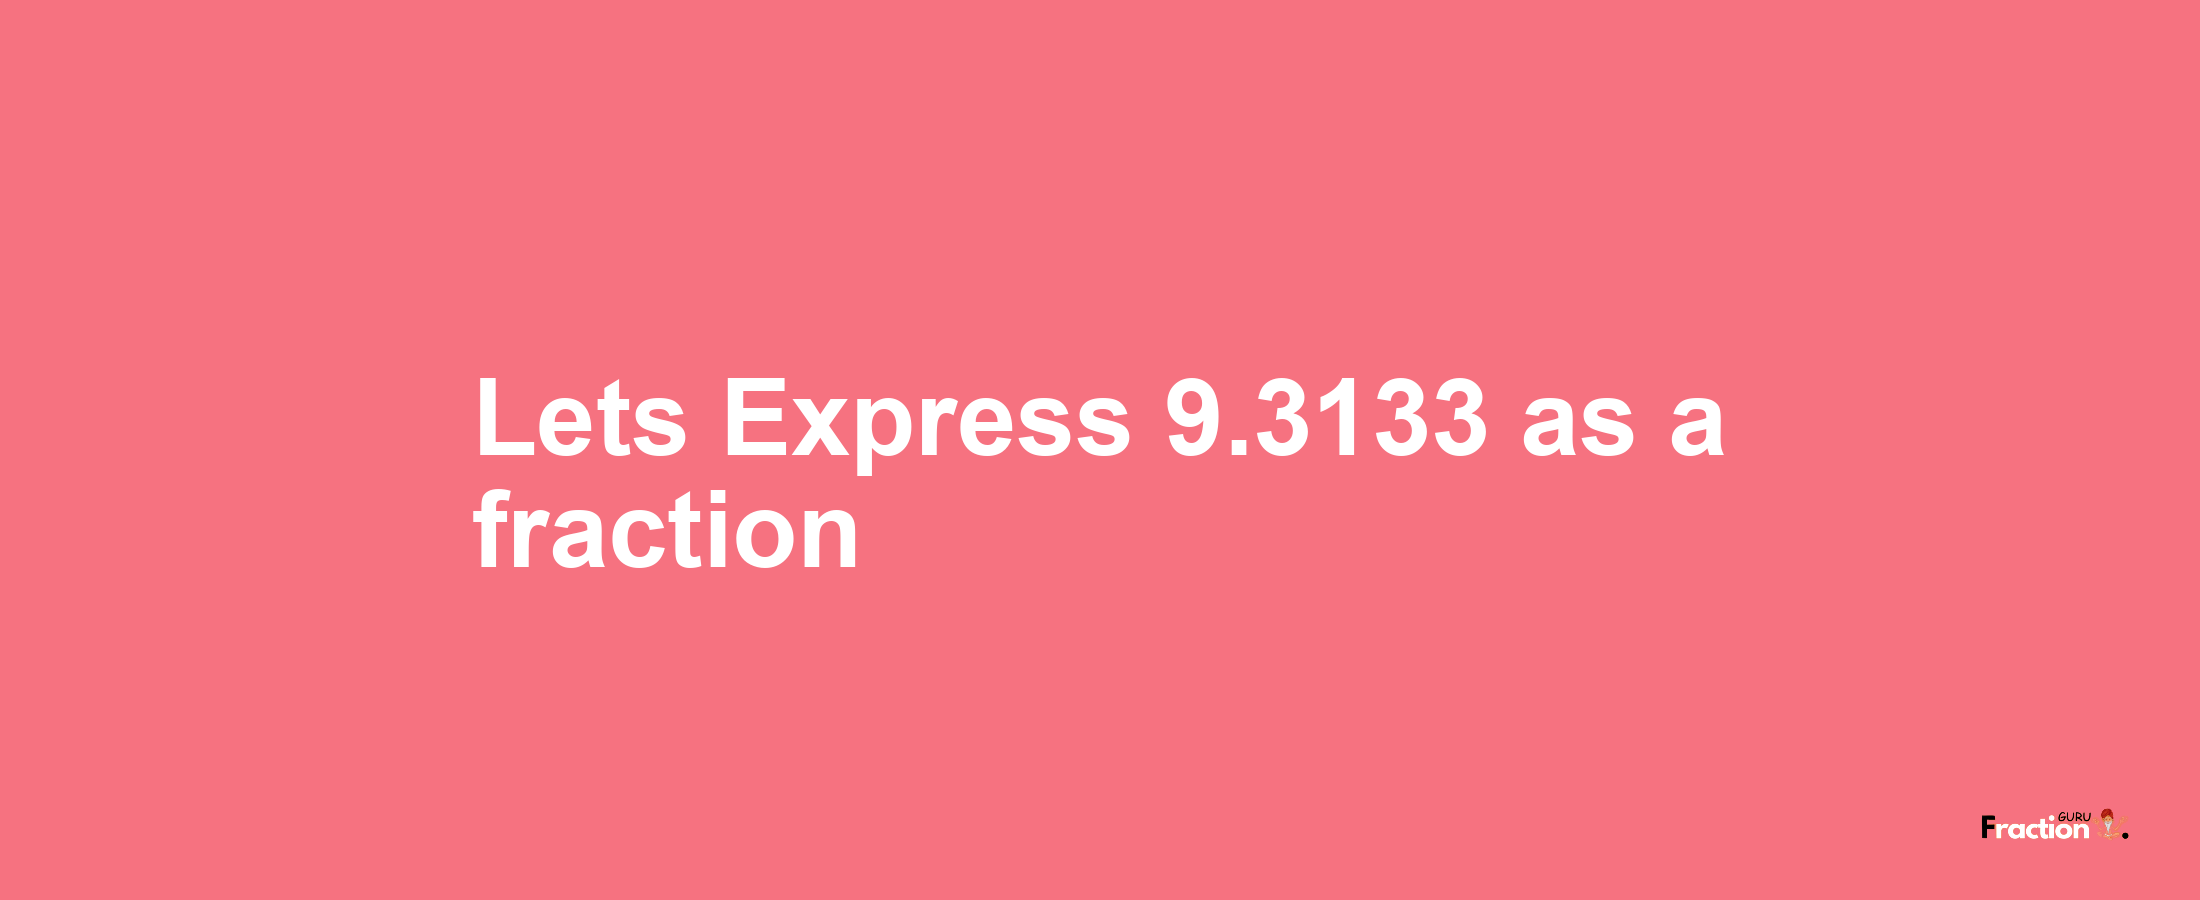 Lets Express 9.3133 as afraction